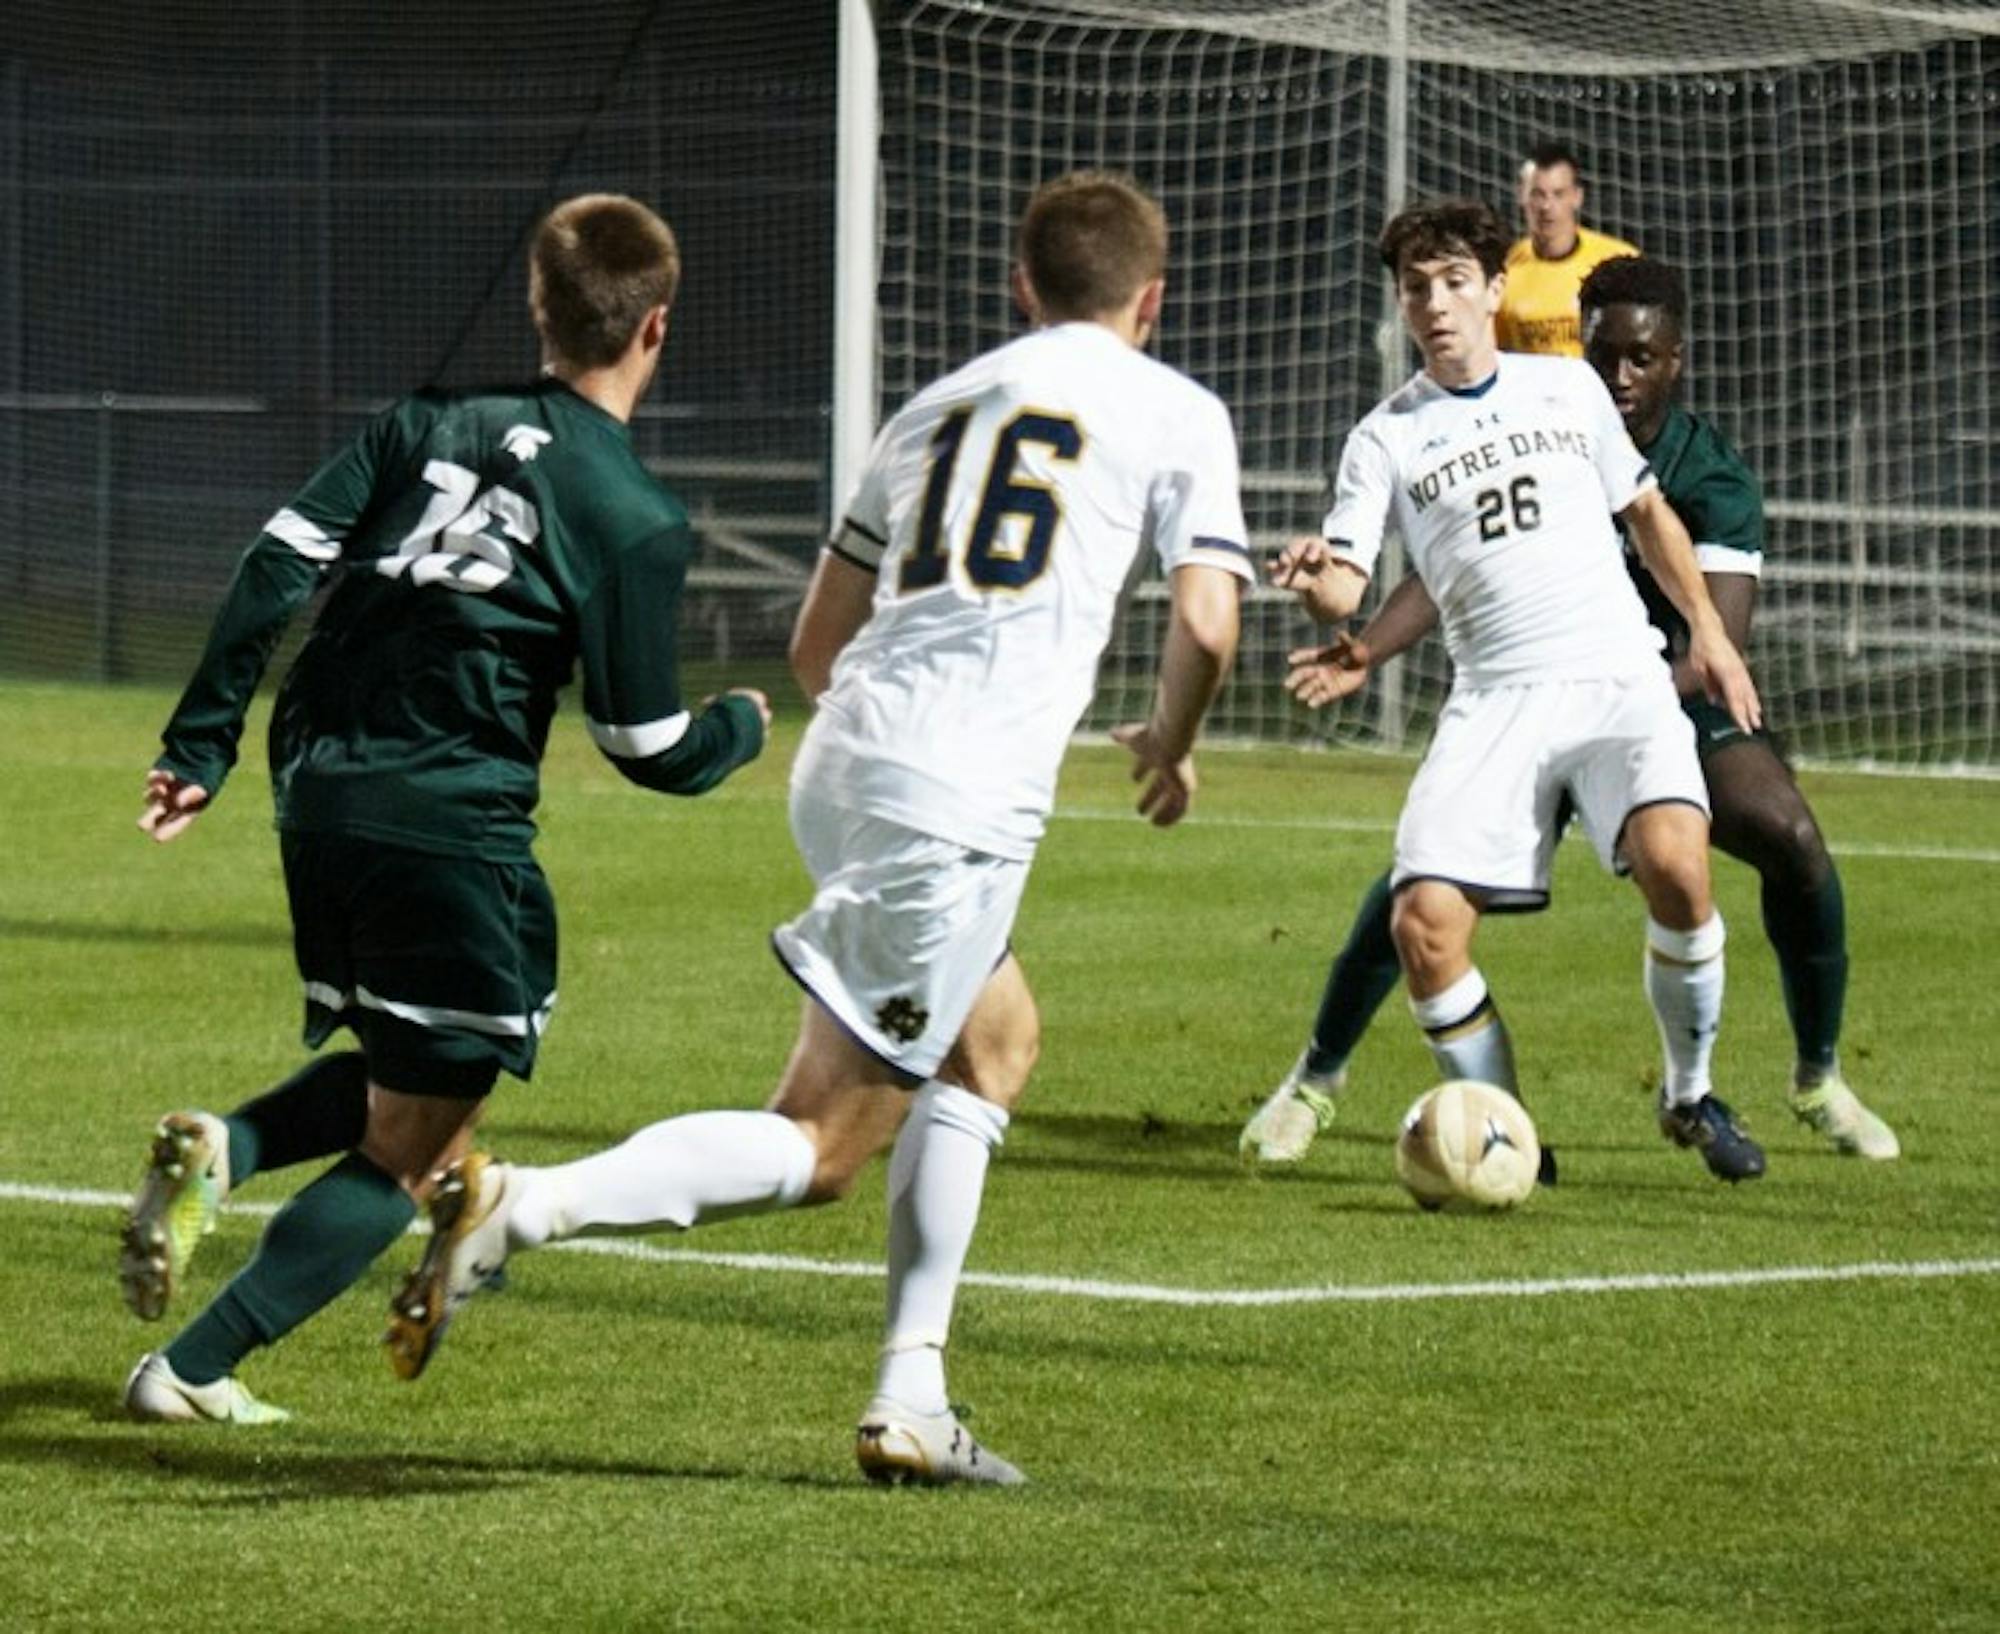 Irish senior midfielder Mark Gormley, right, looks to make a pass  during Notre Dame’s 1-0 loss to Michigan State on Tuesday.